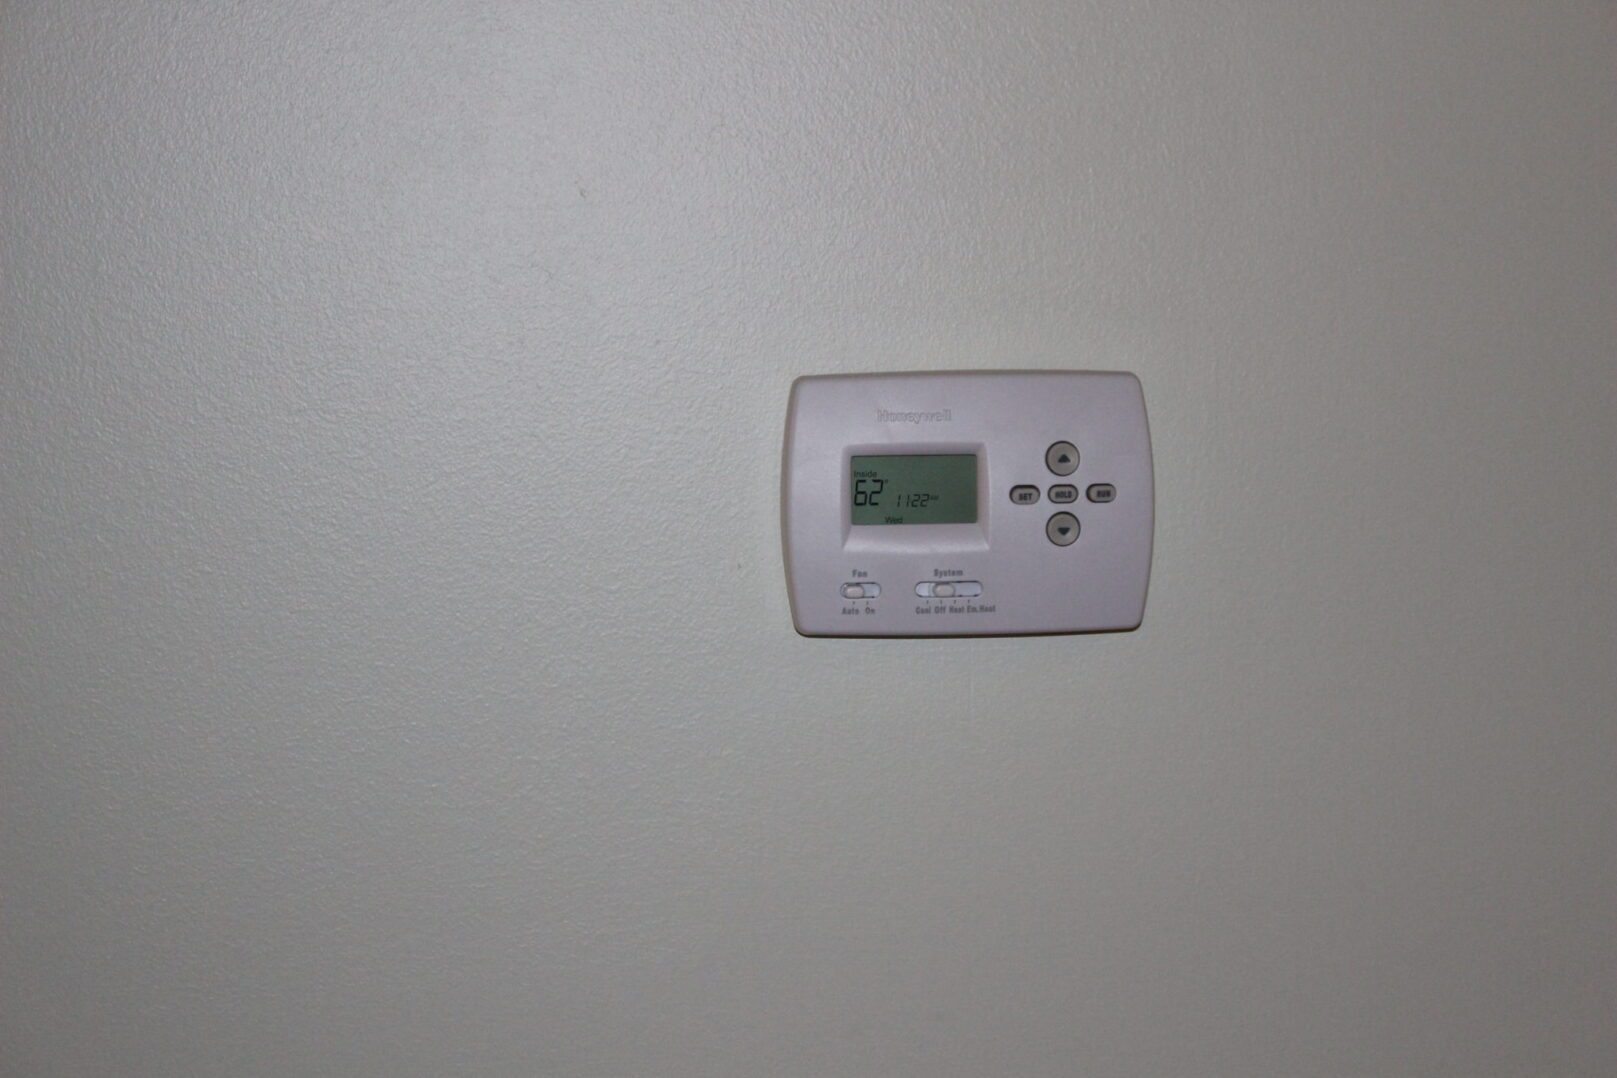 A white digital thermostat mounted on the wall.